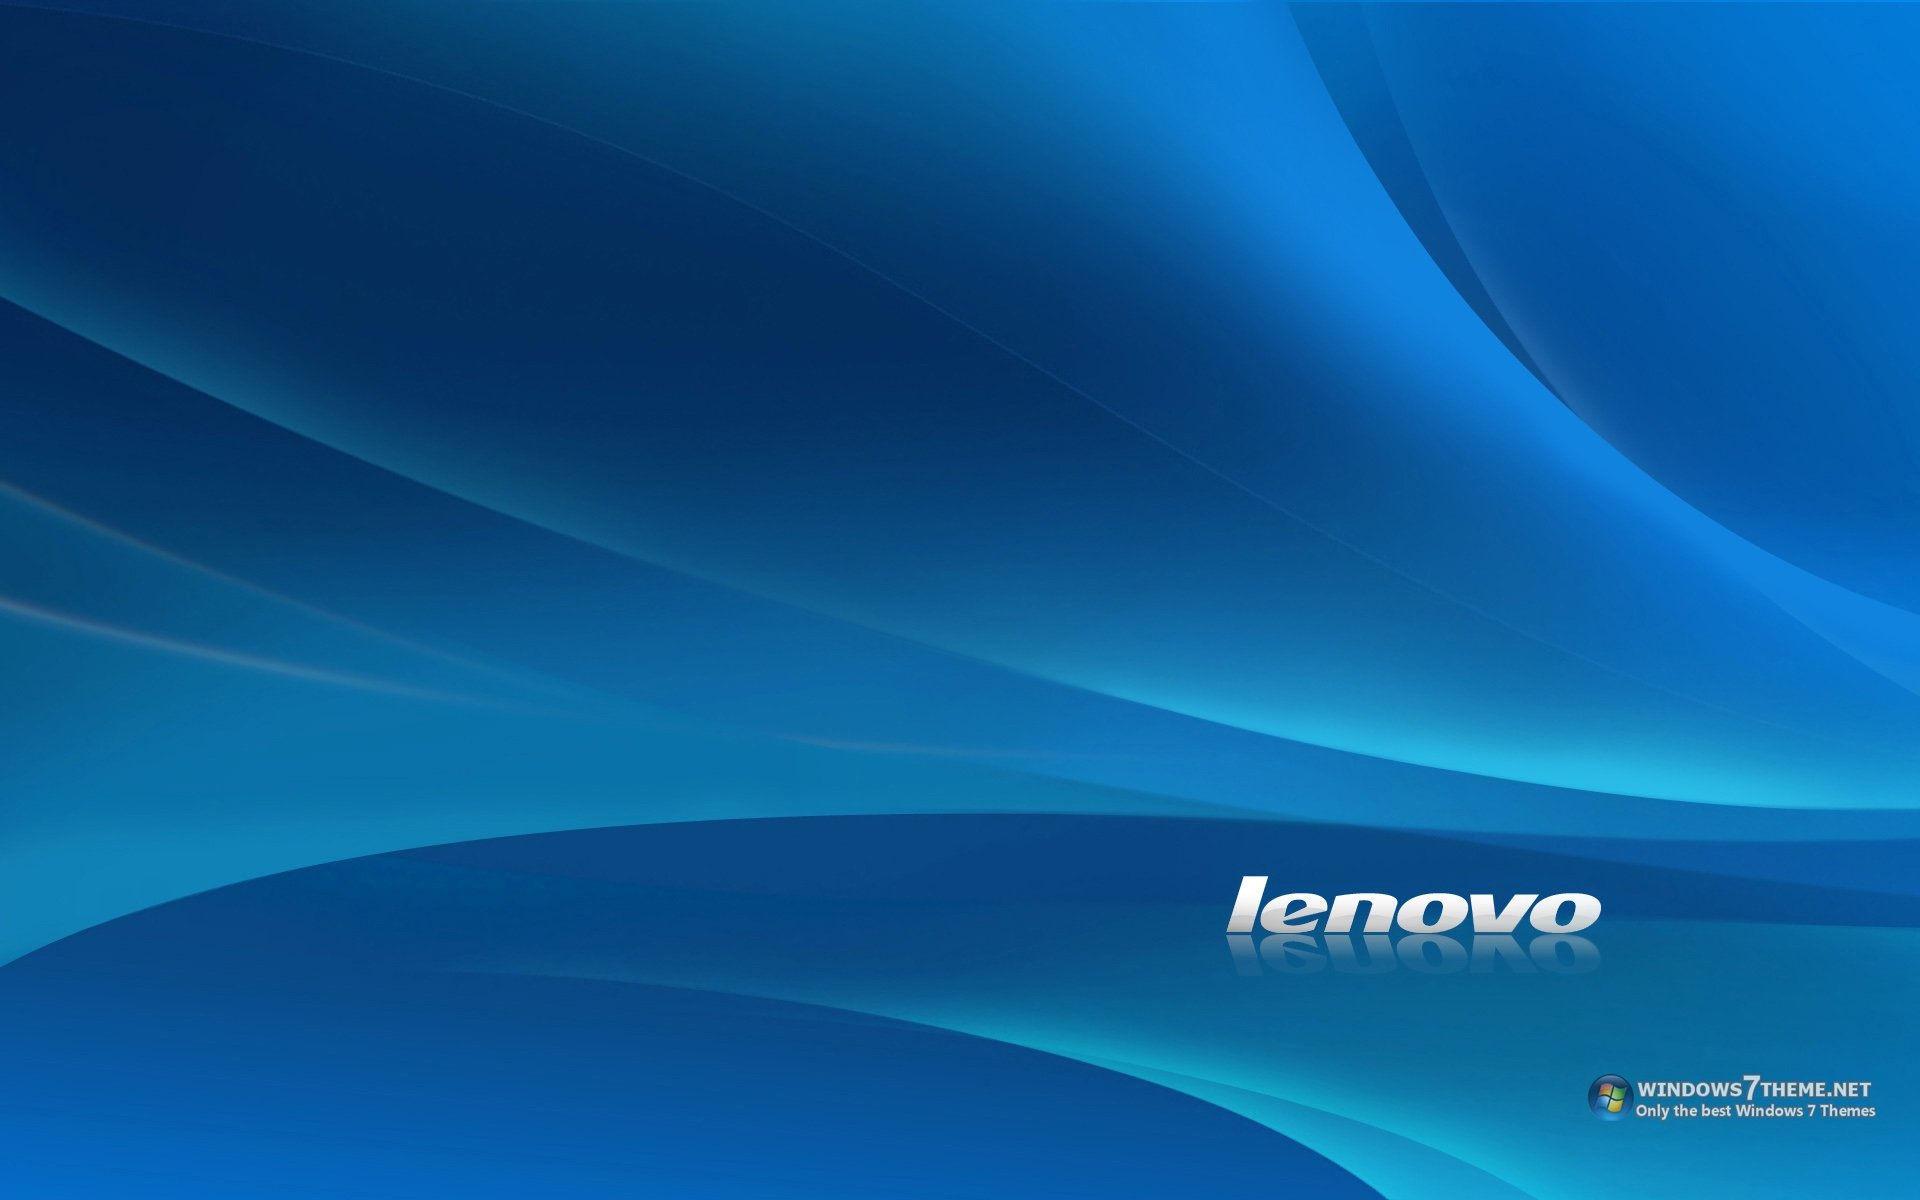 Lenovo Wallpaper Collection in HD for Download  Lenovo wallpapers Desktop  wallpaper Wallpaper windows 10